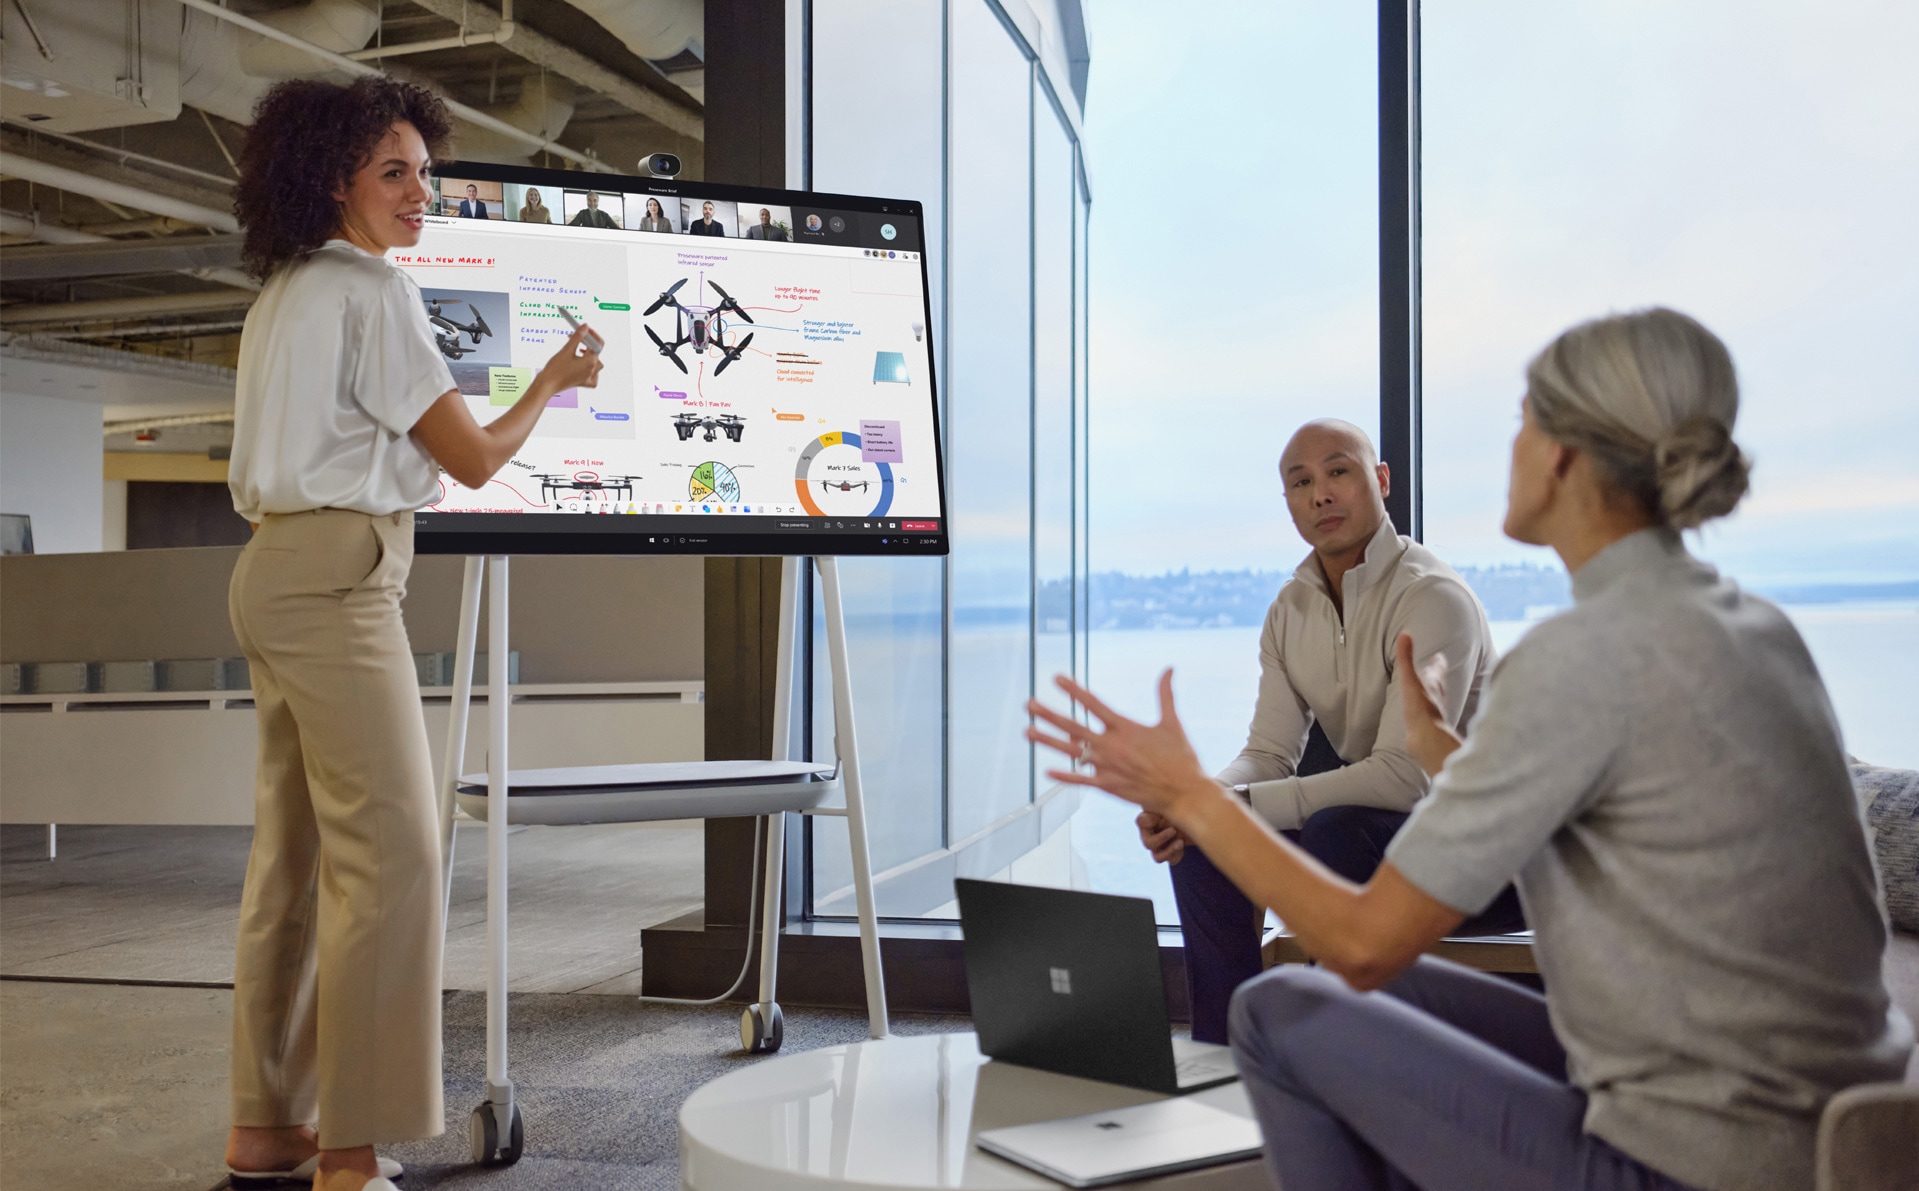 In-person co-workers interact with a PowerPoint presentation in Teams while remote co-workers observe